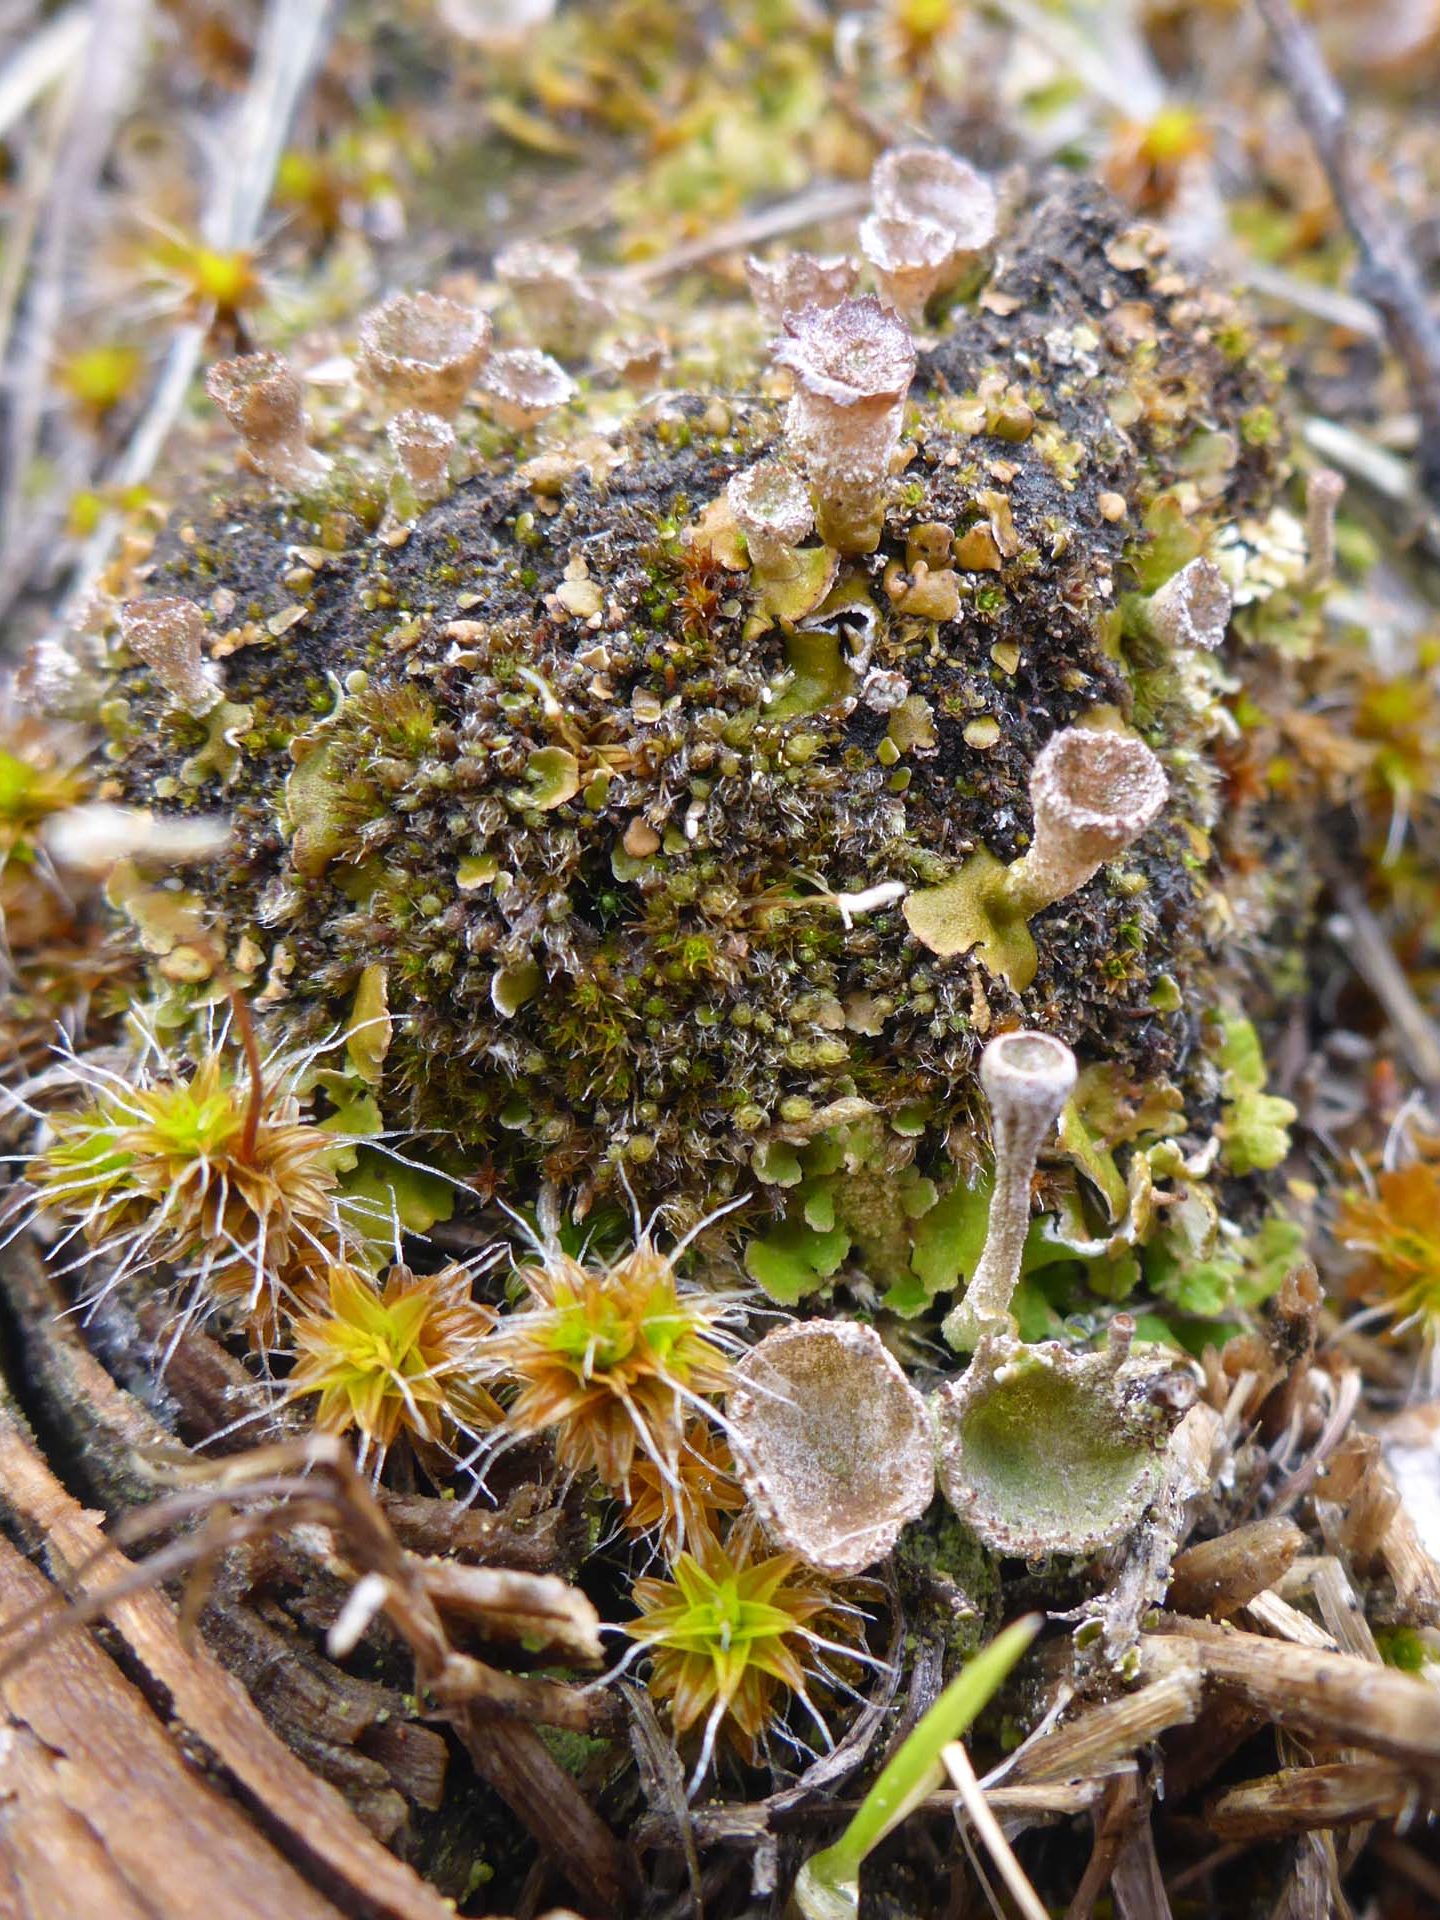 Fruiting mosses and liverworts. D. Burk.